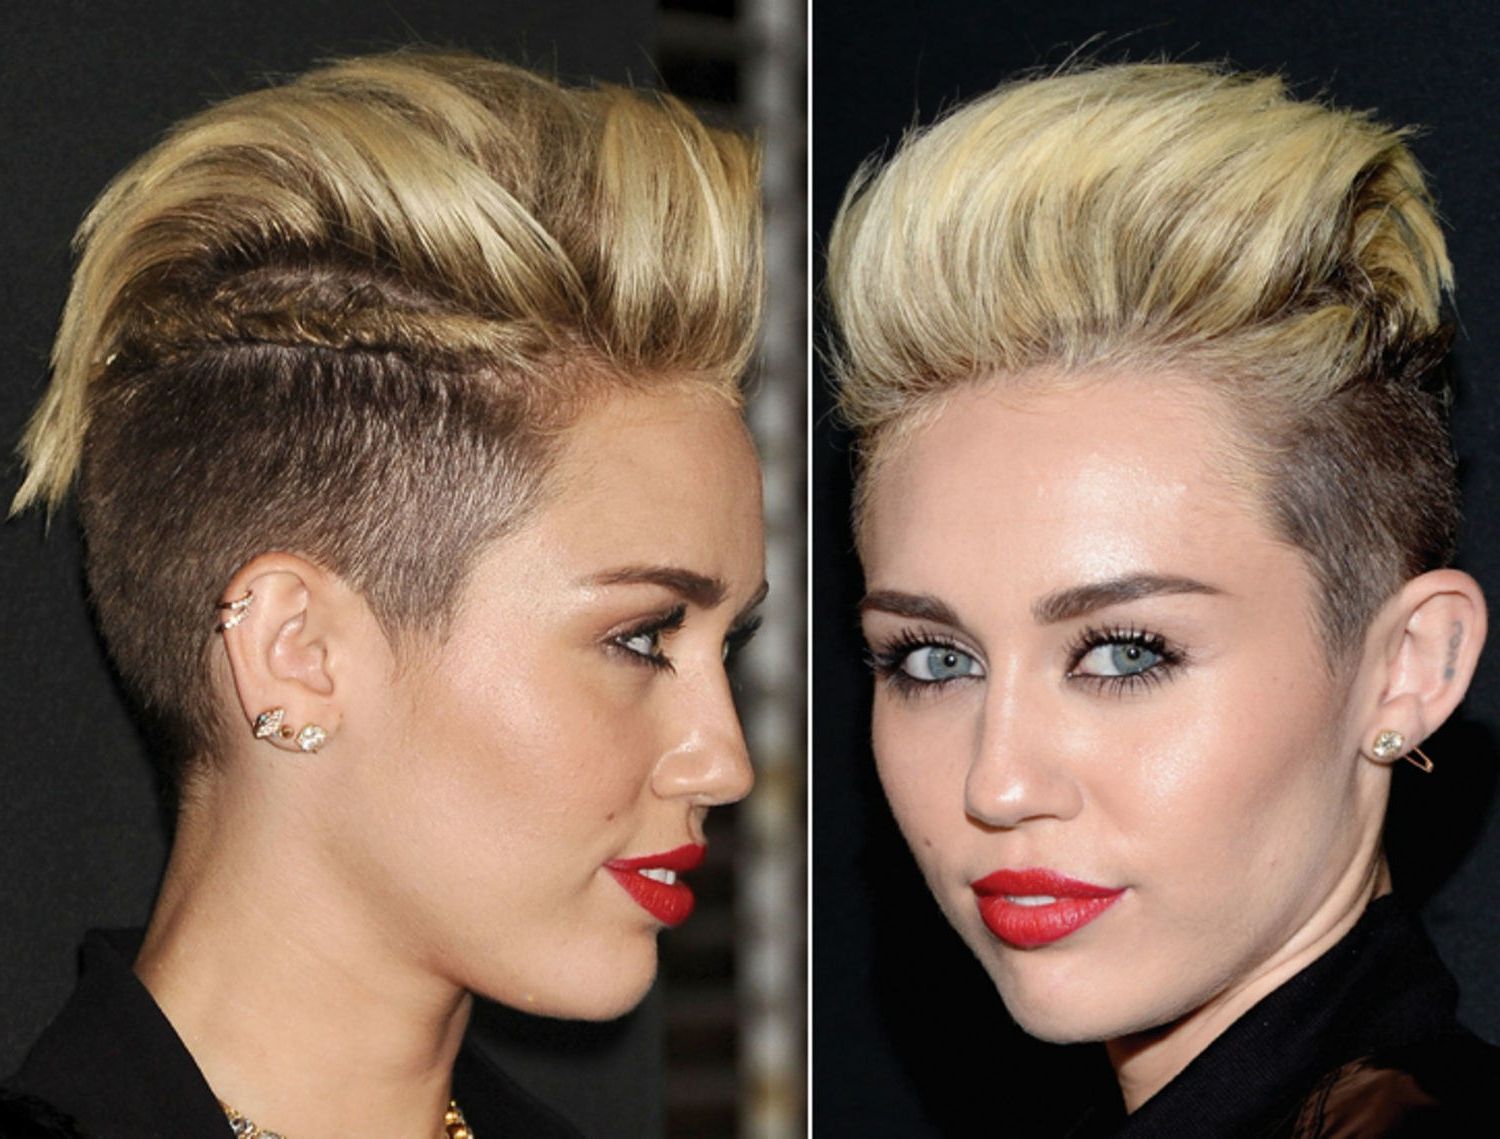 Oh, Look! Miley Cyrus Shows Us A Super Cute Way To Tweak Your Mohawk Intended For Miley Cyrus Short Hairstyles (View 25 of 25)